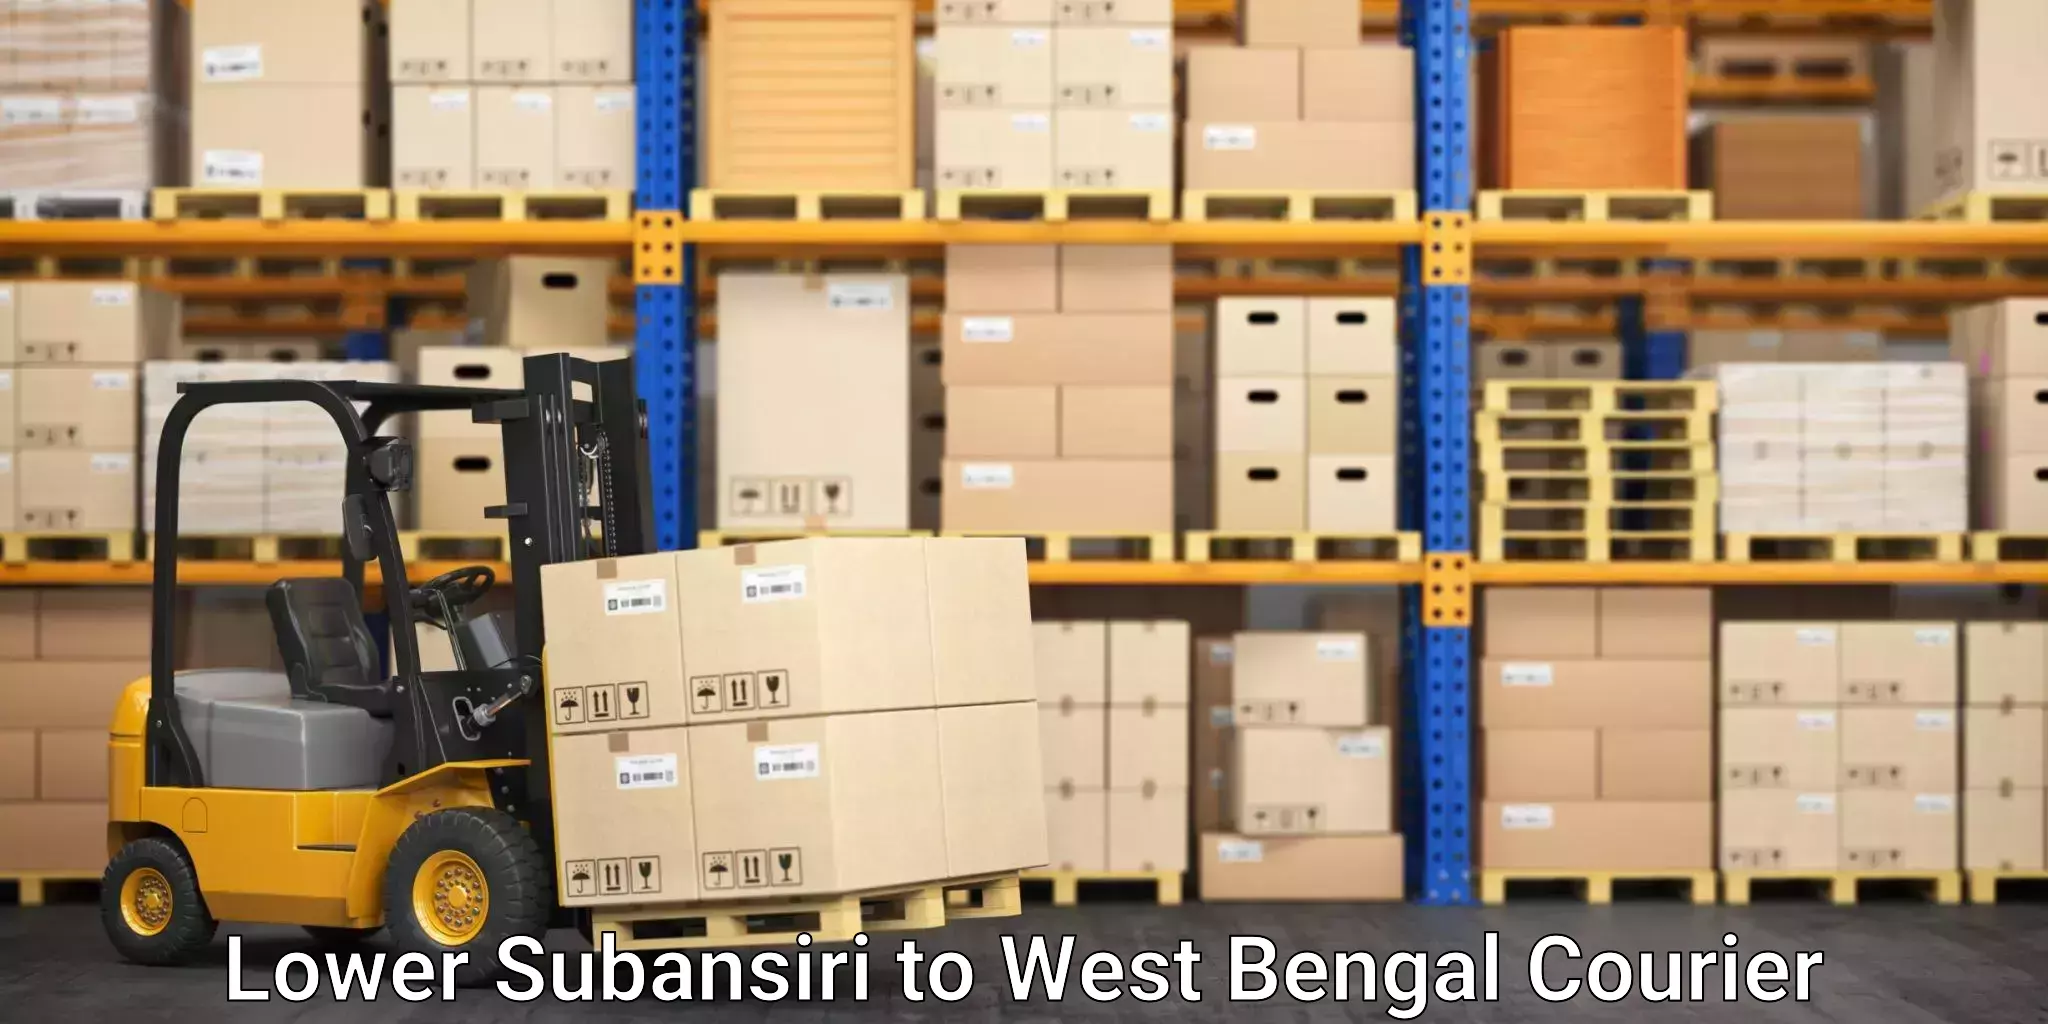 Comprehensive logistics solutions in Lower Subansiri to West Bengal